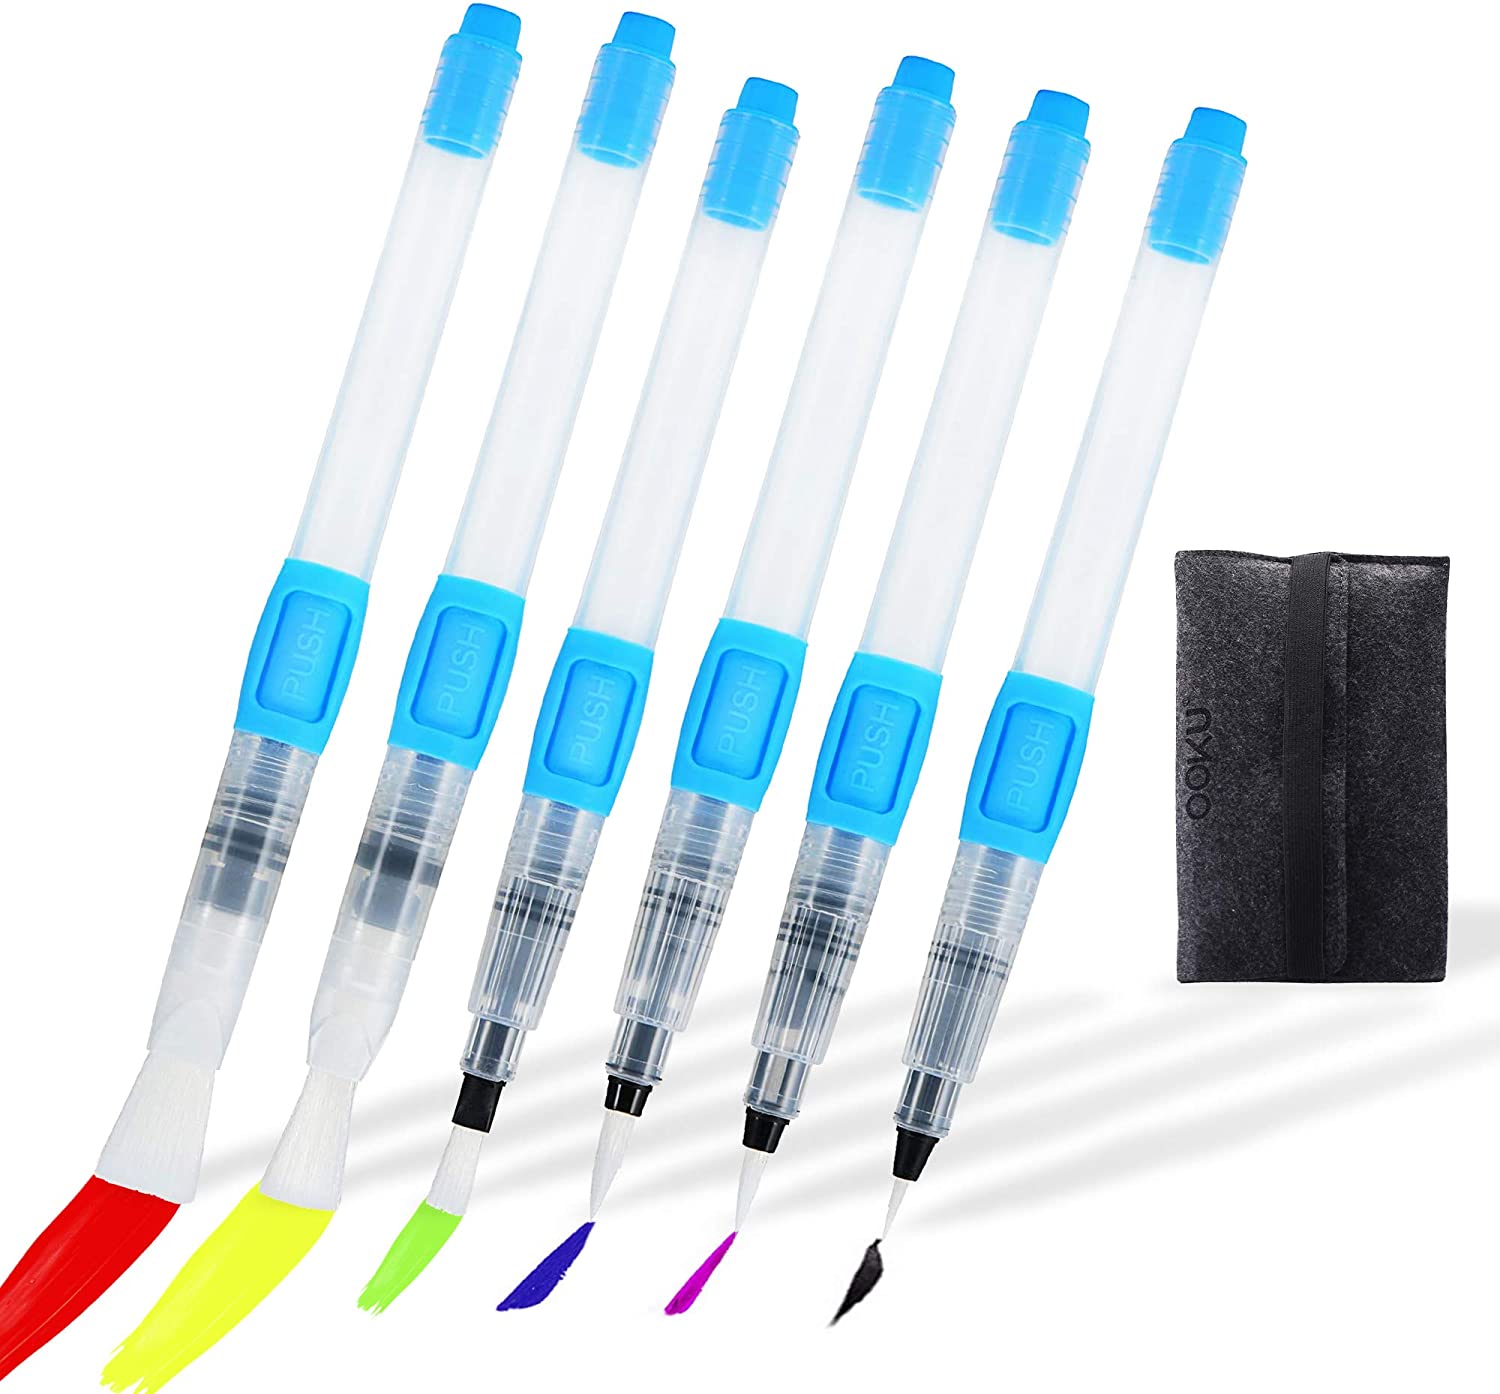 Ooku Watercolor Brush Pens | Professional Watercolor Pens With Push Button To Control Flow Speed, Self-Moistening Water Brush Pen | Used For Painting, Lettering, Coloring Water Color Brush - Ooku